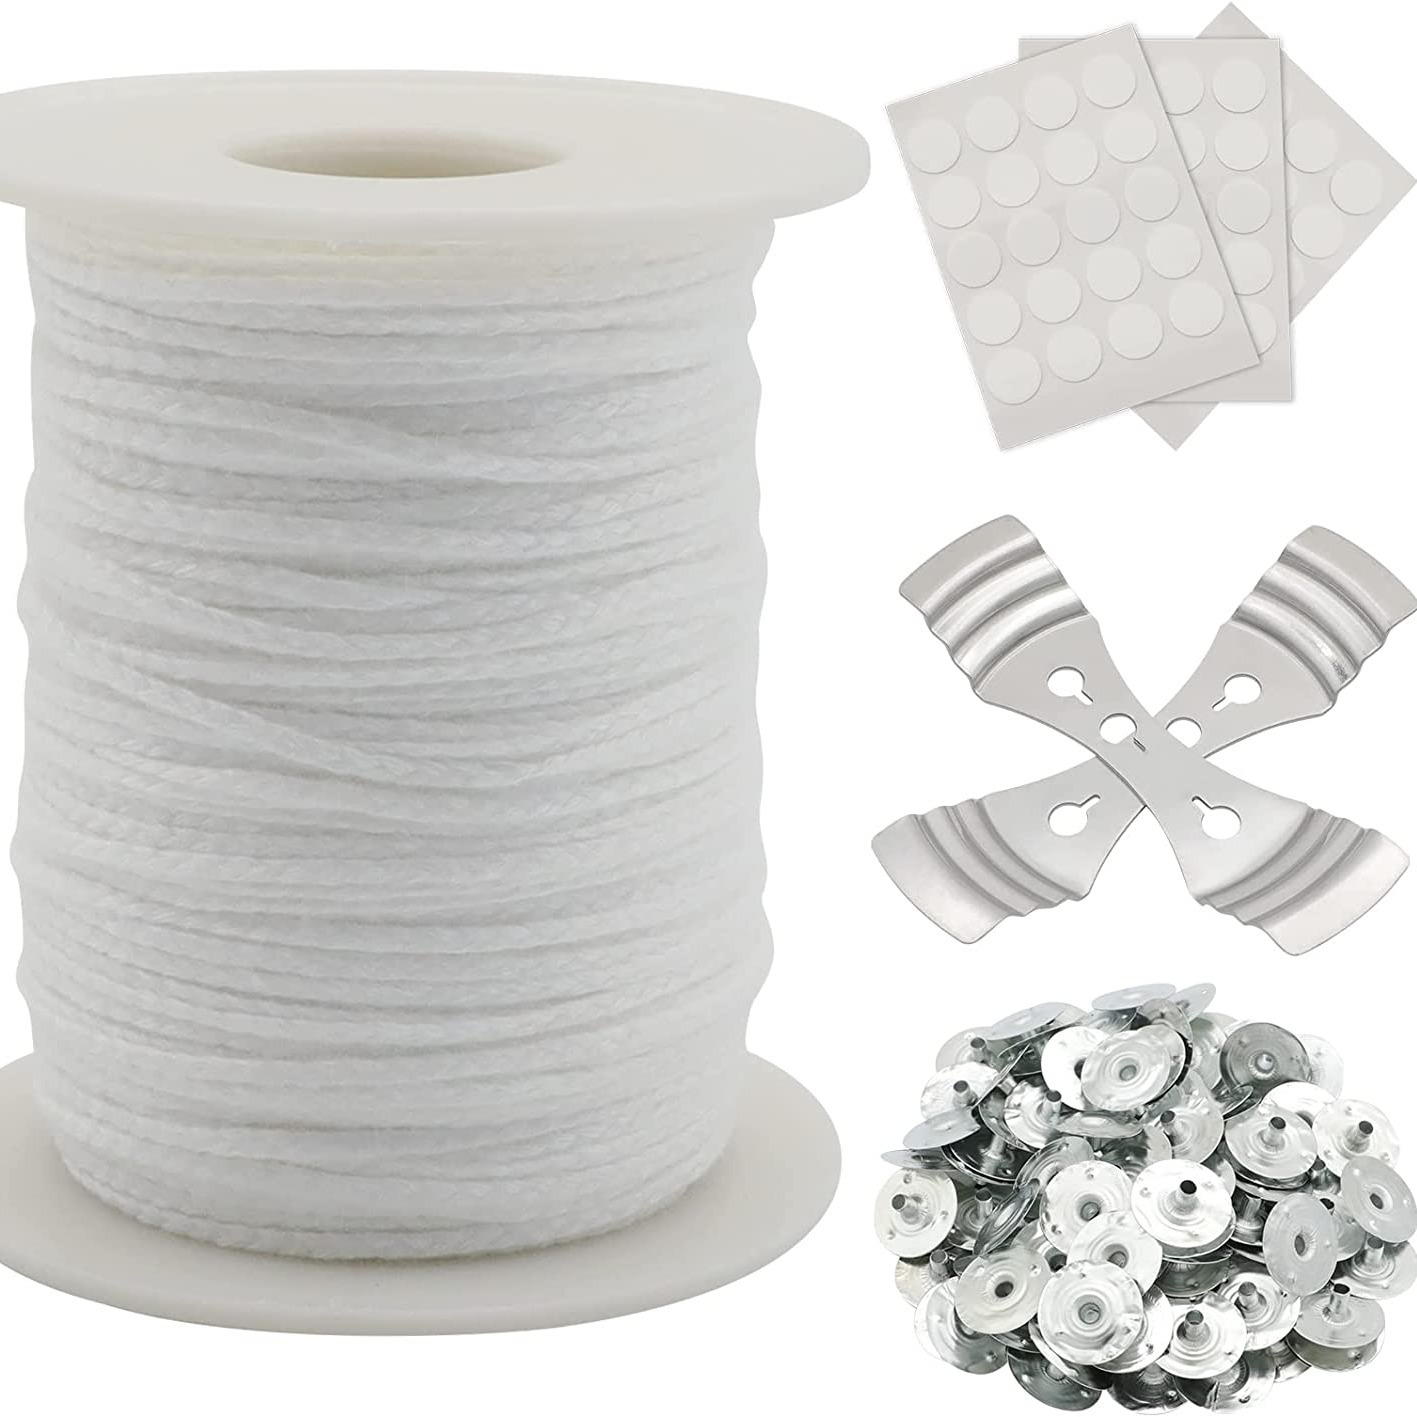 Candle Wick Roll Kit, 200ft Braided Wick Spool, 2 Candle Wick Centering  Stands, 100 Base Metal Support Sheets, 3 Candle Wire Stickers, DIY Candle  Maki